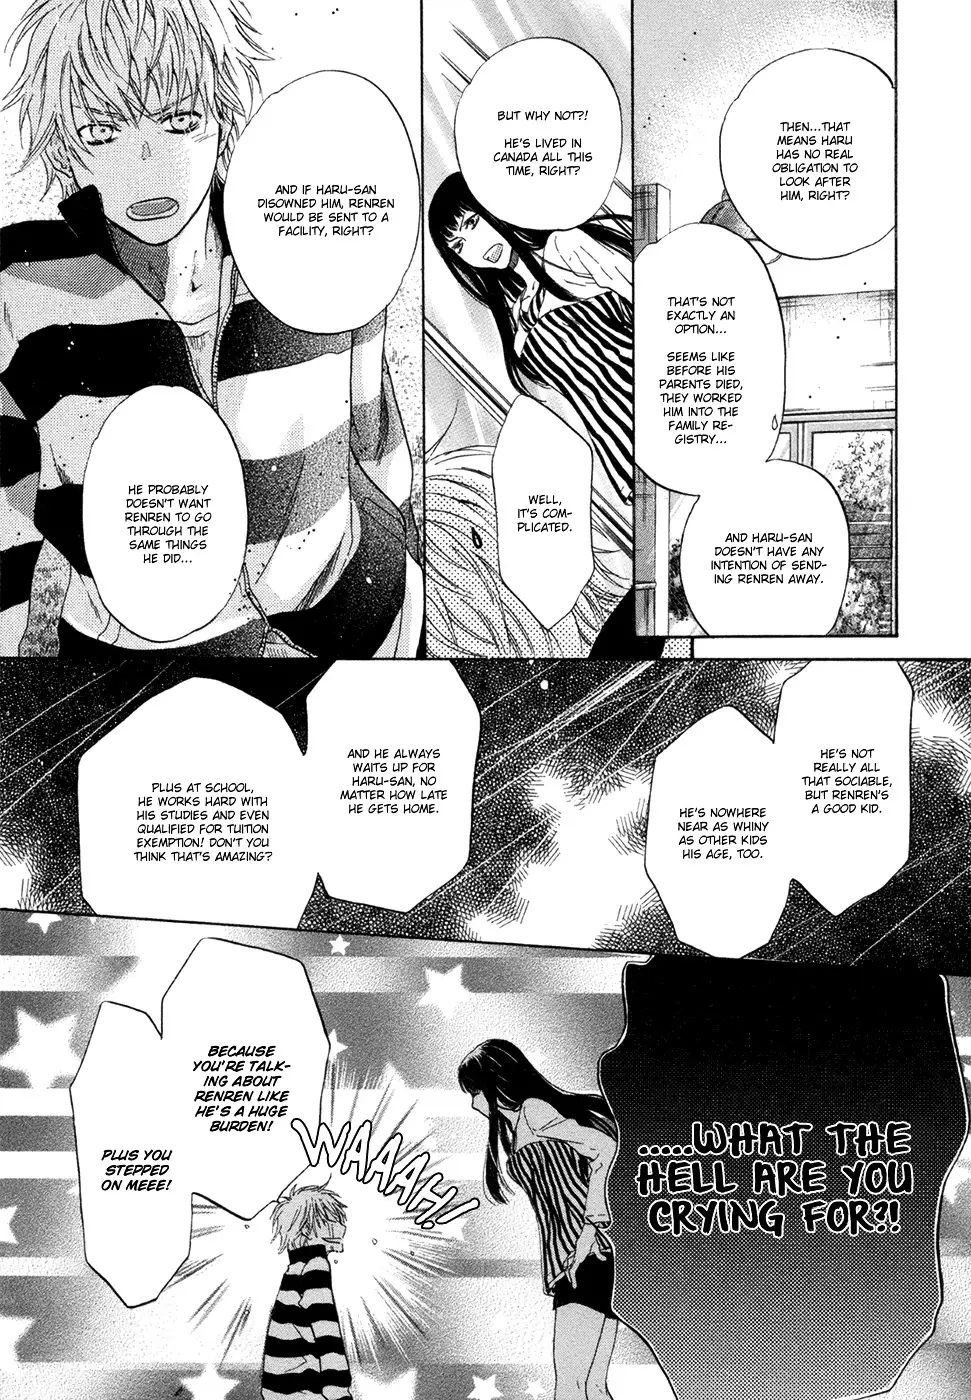 Super Lovers - 6 page 31-26cb4d5a